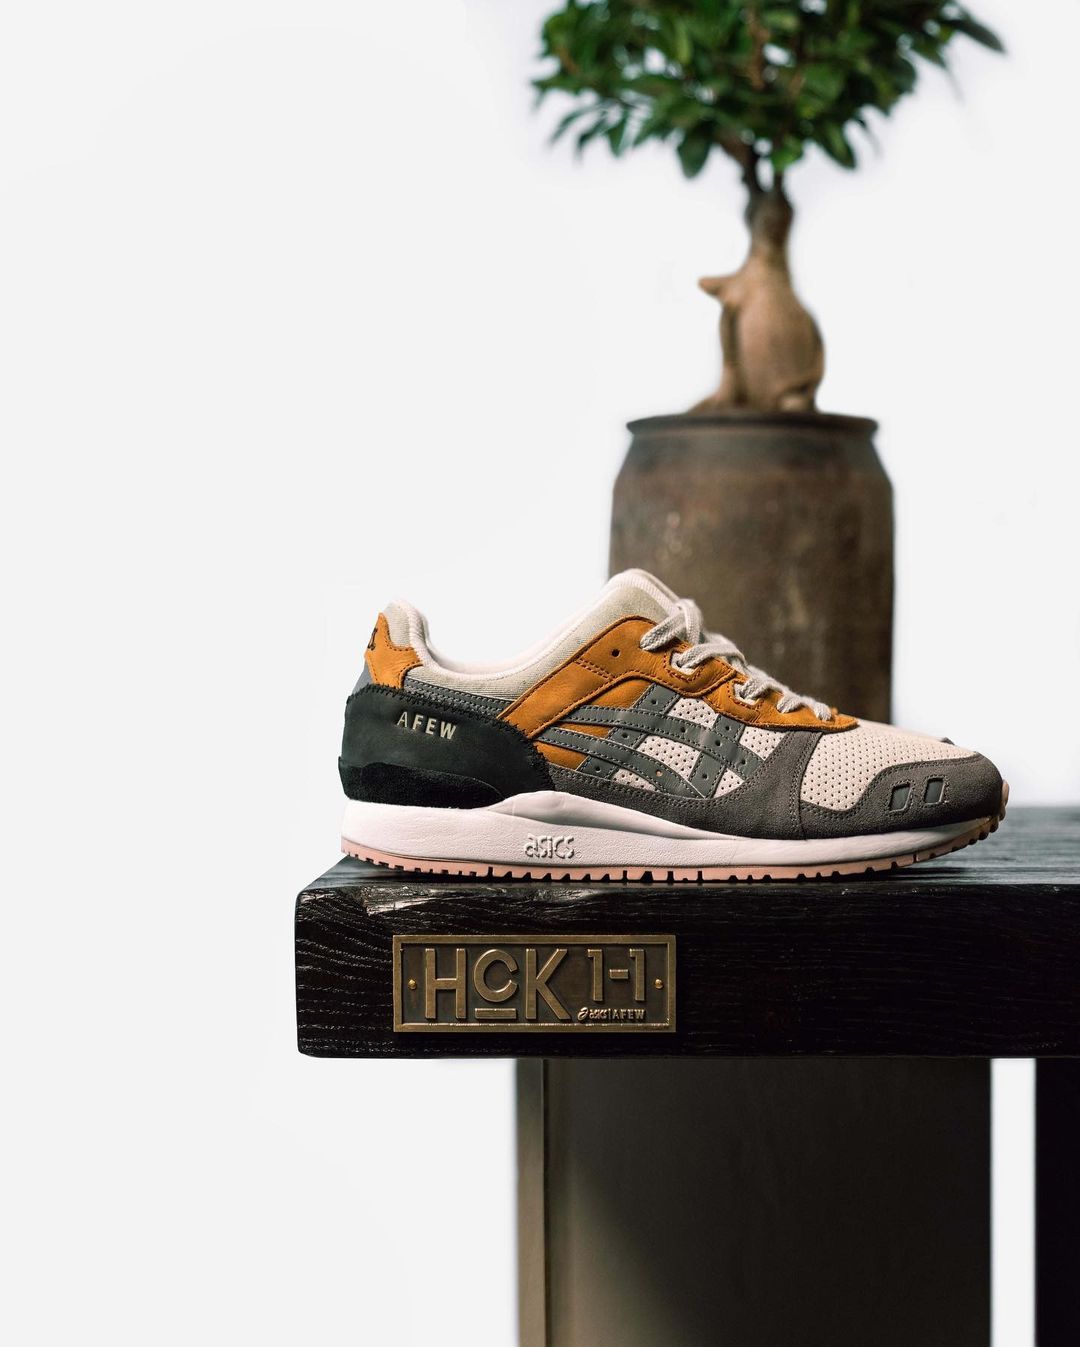 AFEW x Asics Gel Lyte III 'Beauty Of Imperfection CP 1/1'